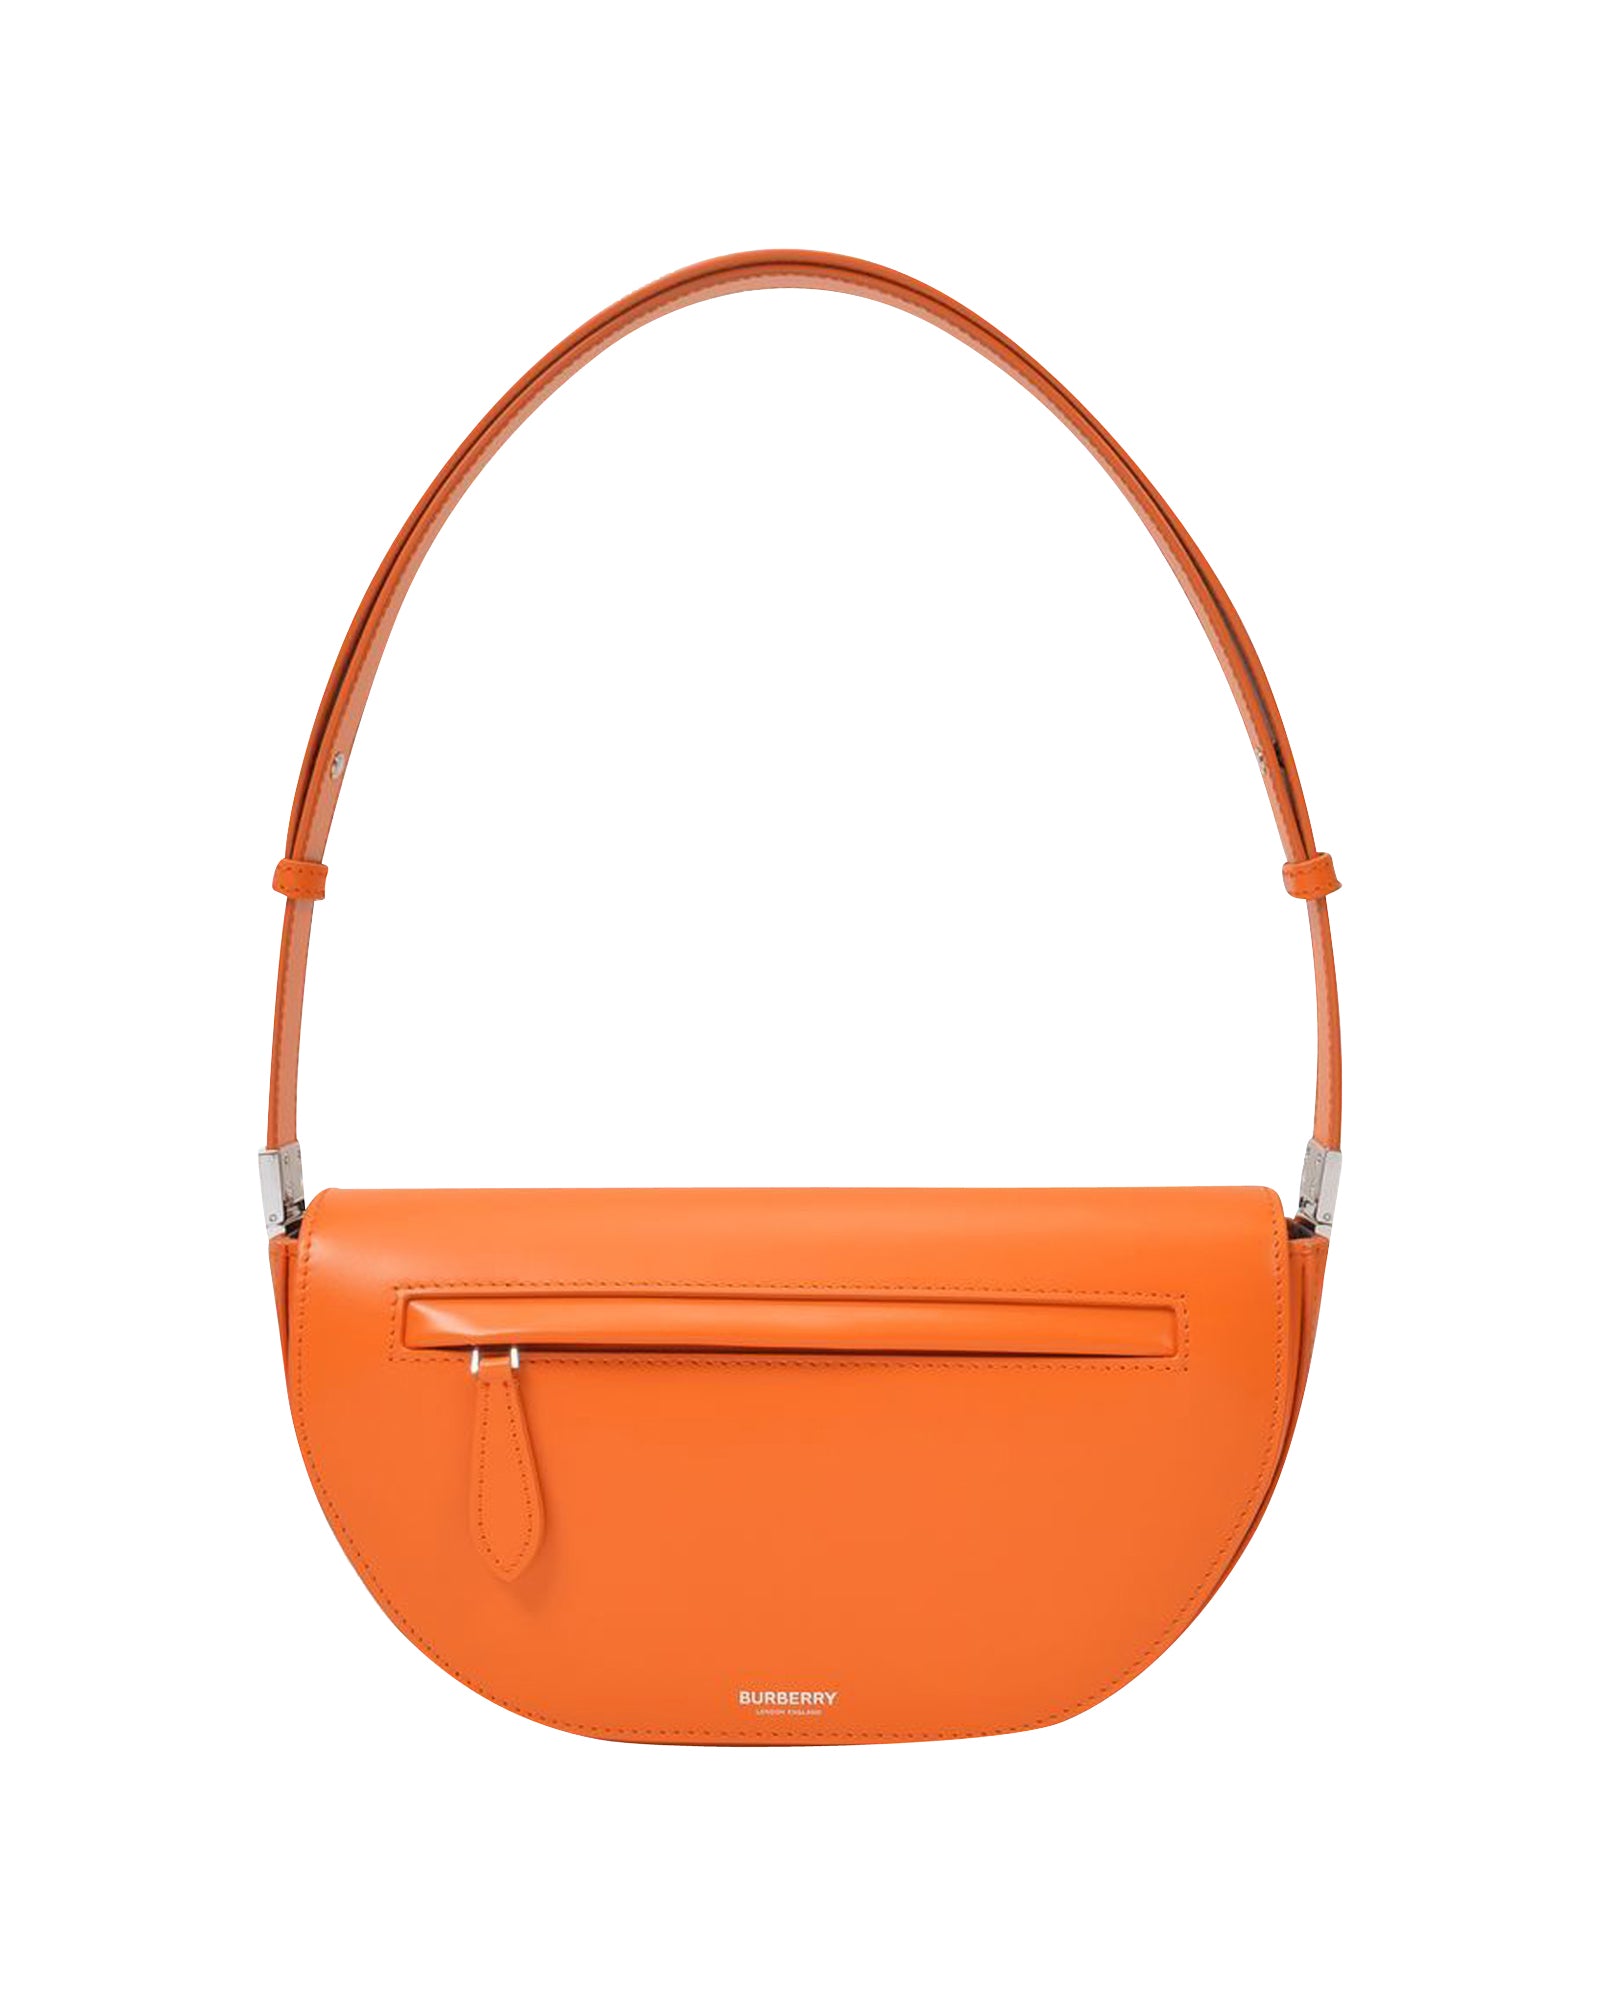 BURBERRY Olympia Small Bag in Orange Leather